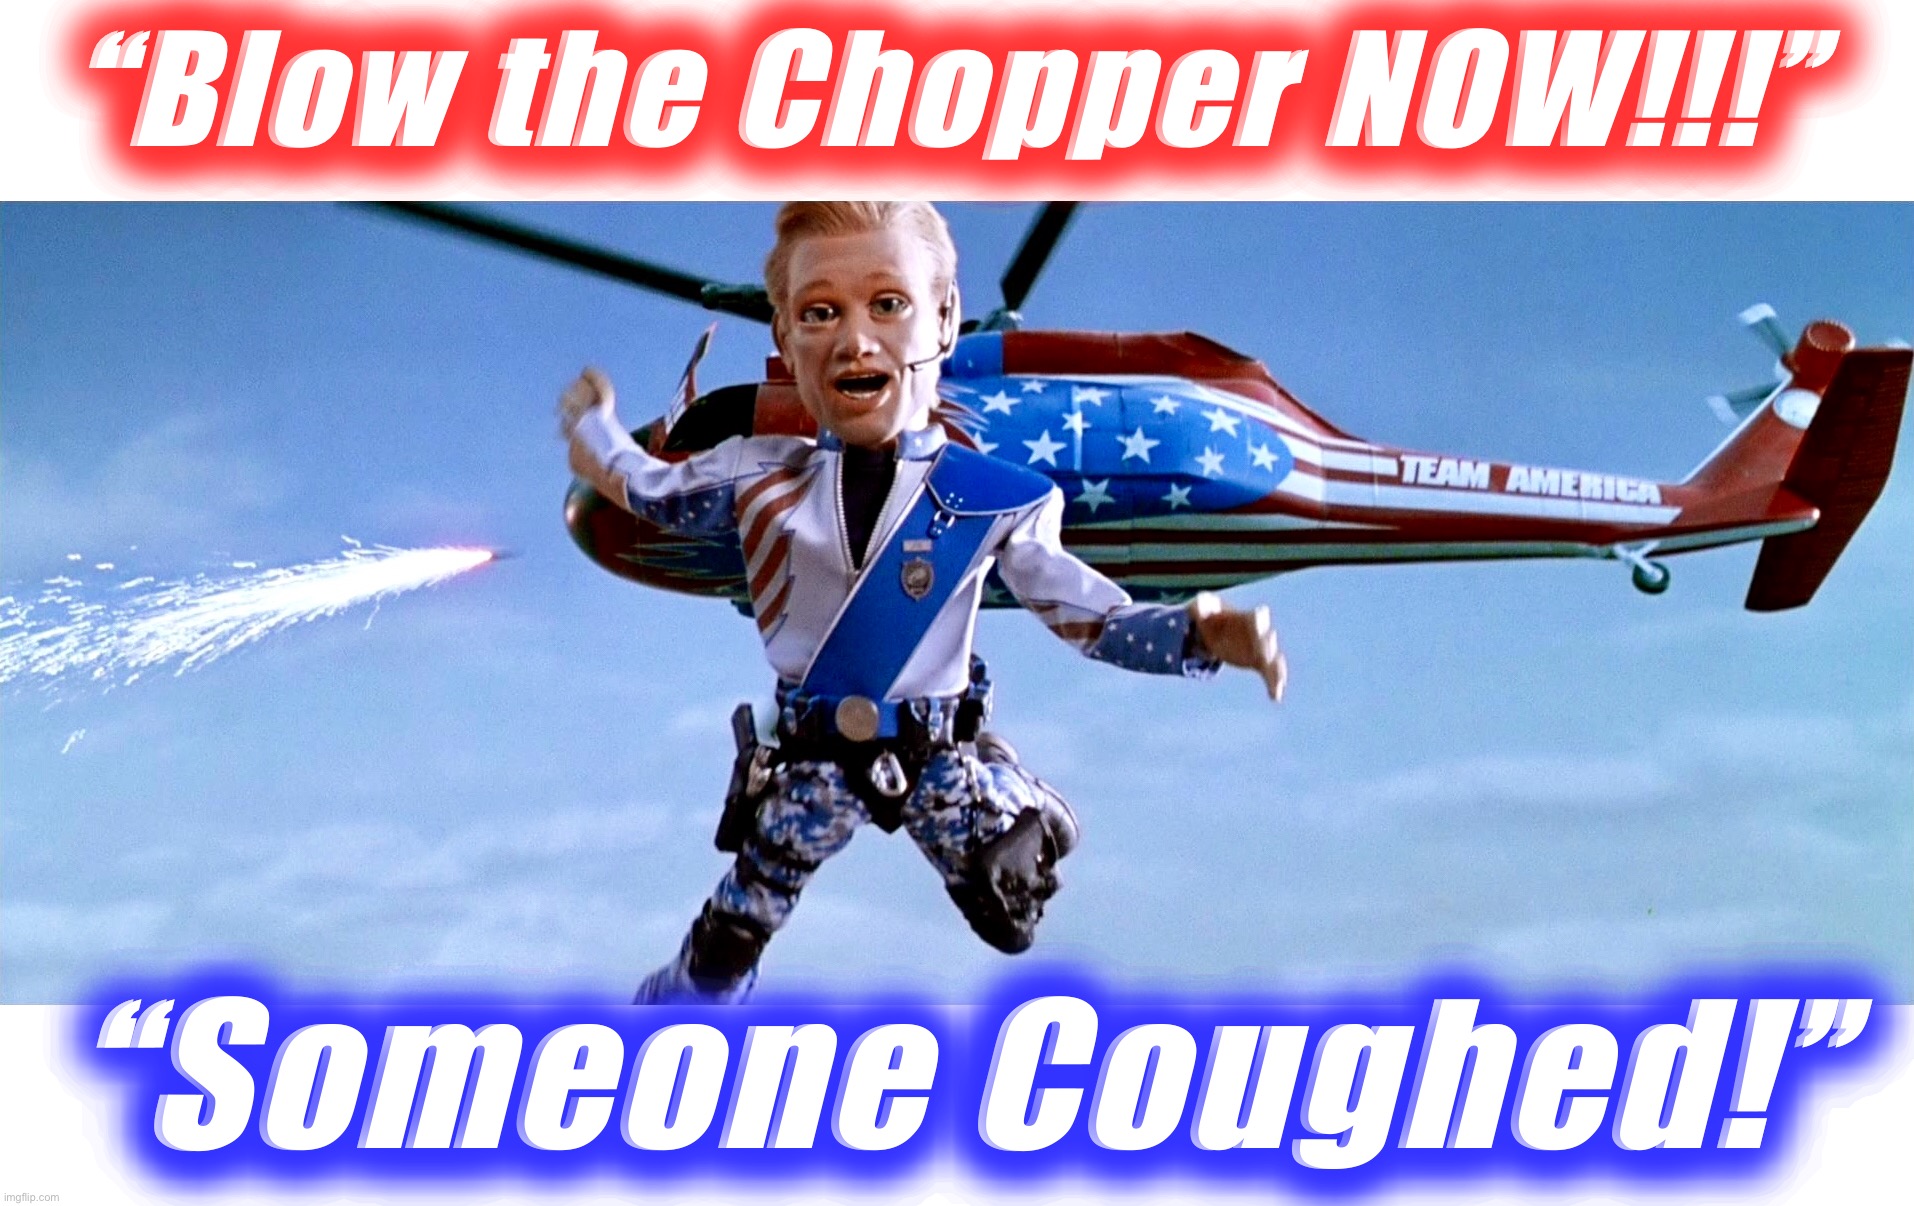 Discretion and Valour | “Blow the Chopper NOW!!!”; “Someone Coughed!” | image tagged in team america,memes,world war c,moronavirus,action movies,get to the choppa | made w/ Imgflip meme maker